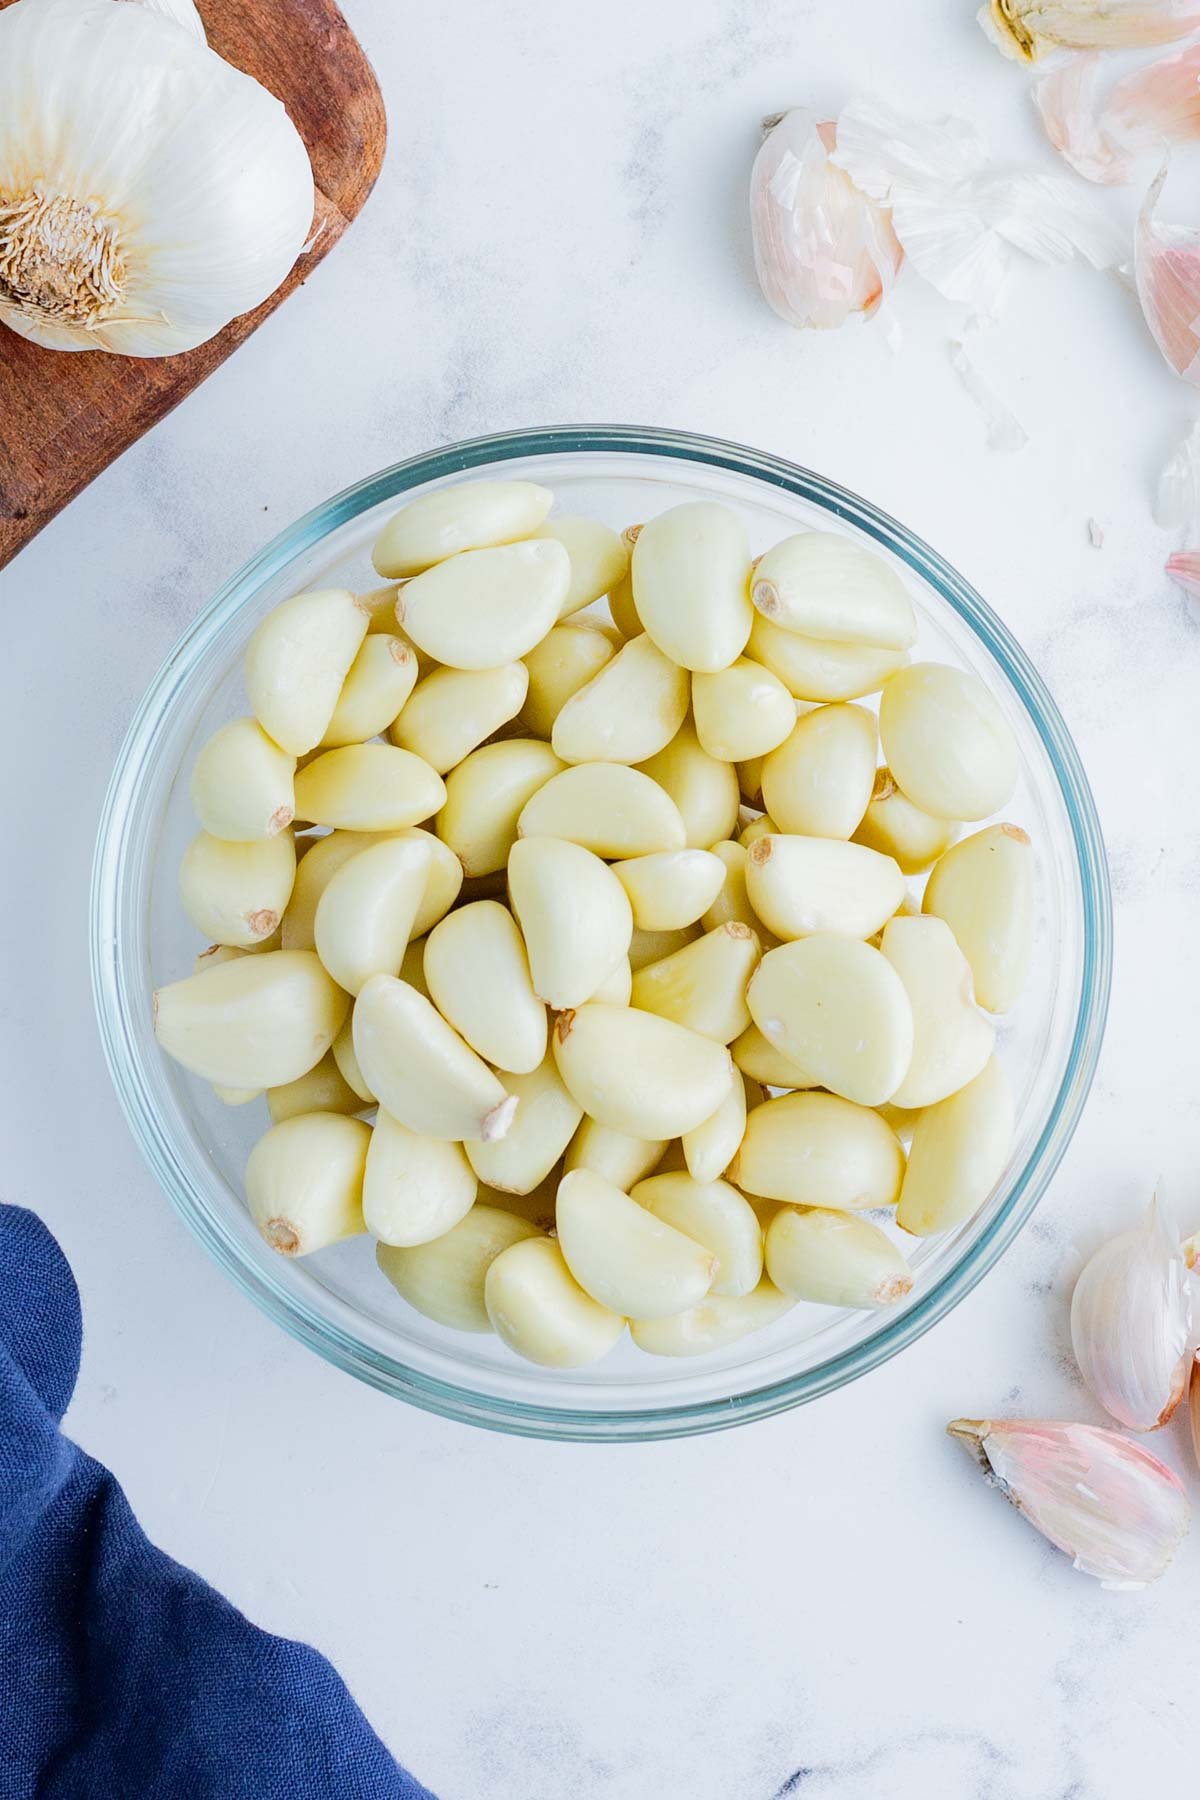 Peeled garlic cloves in a glass bowl.